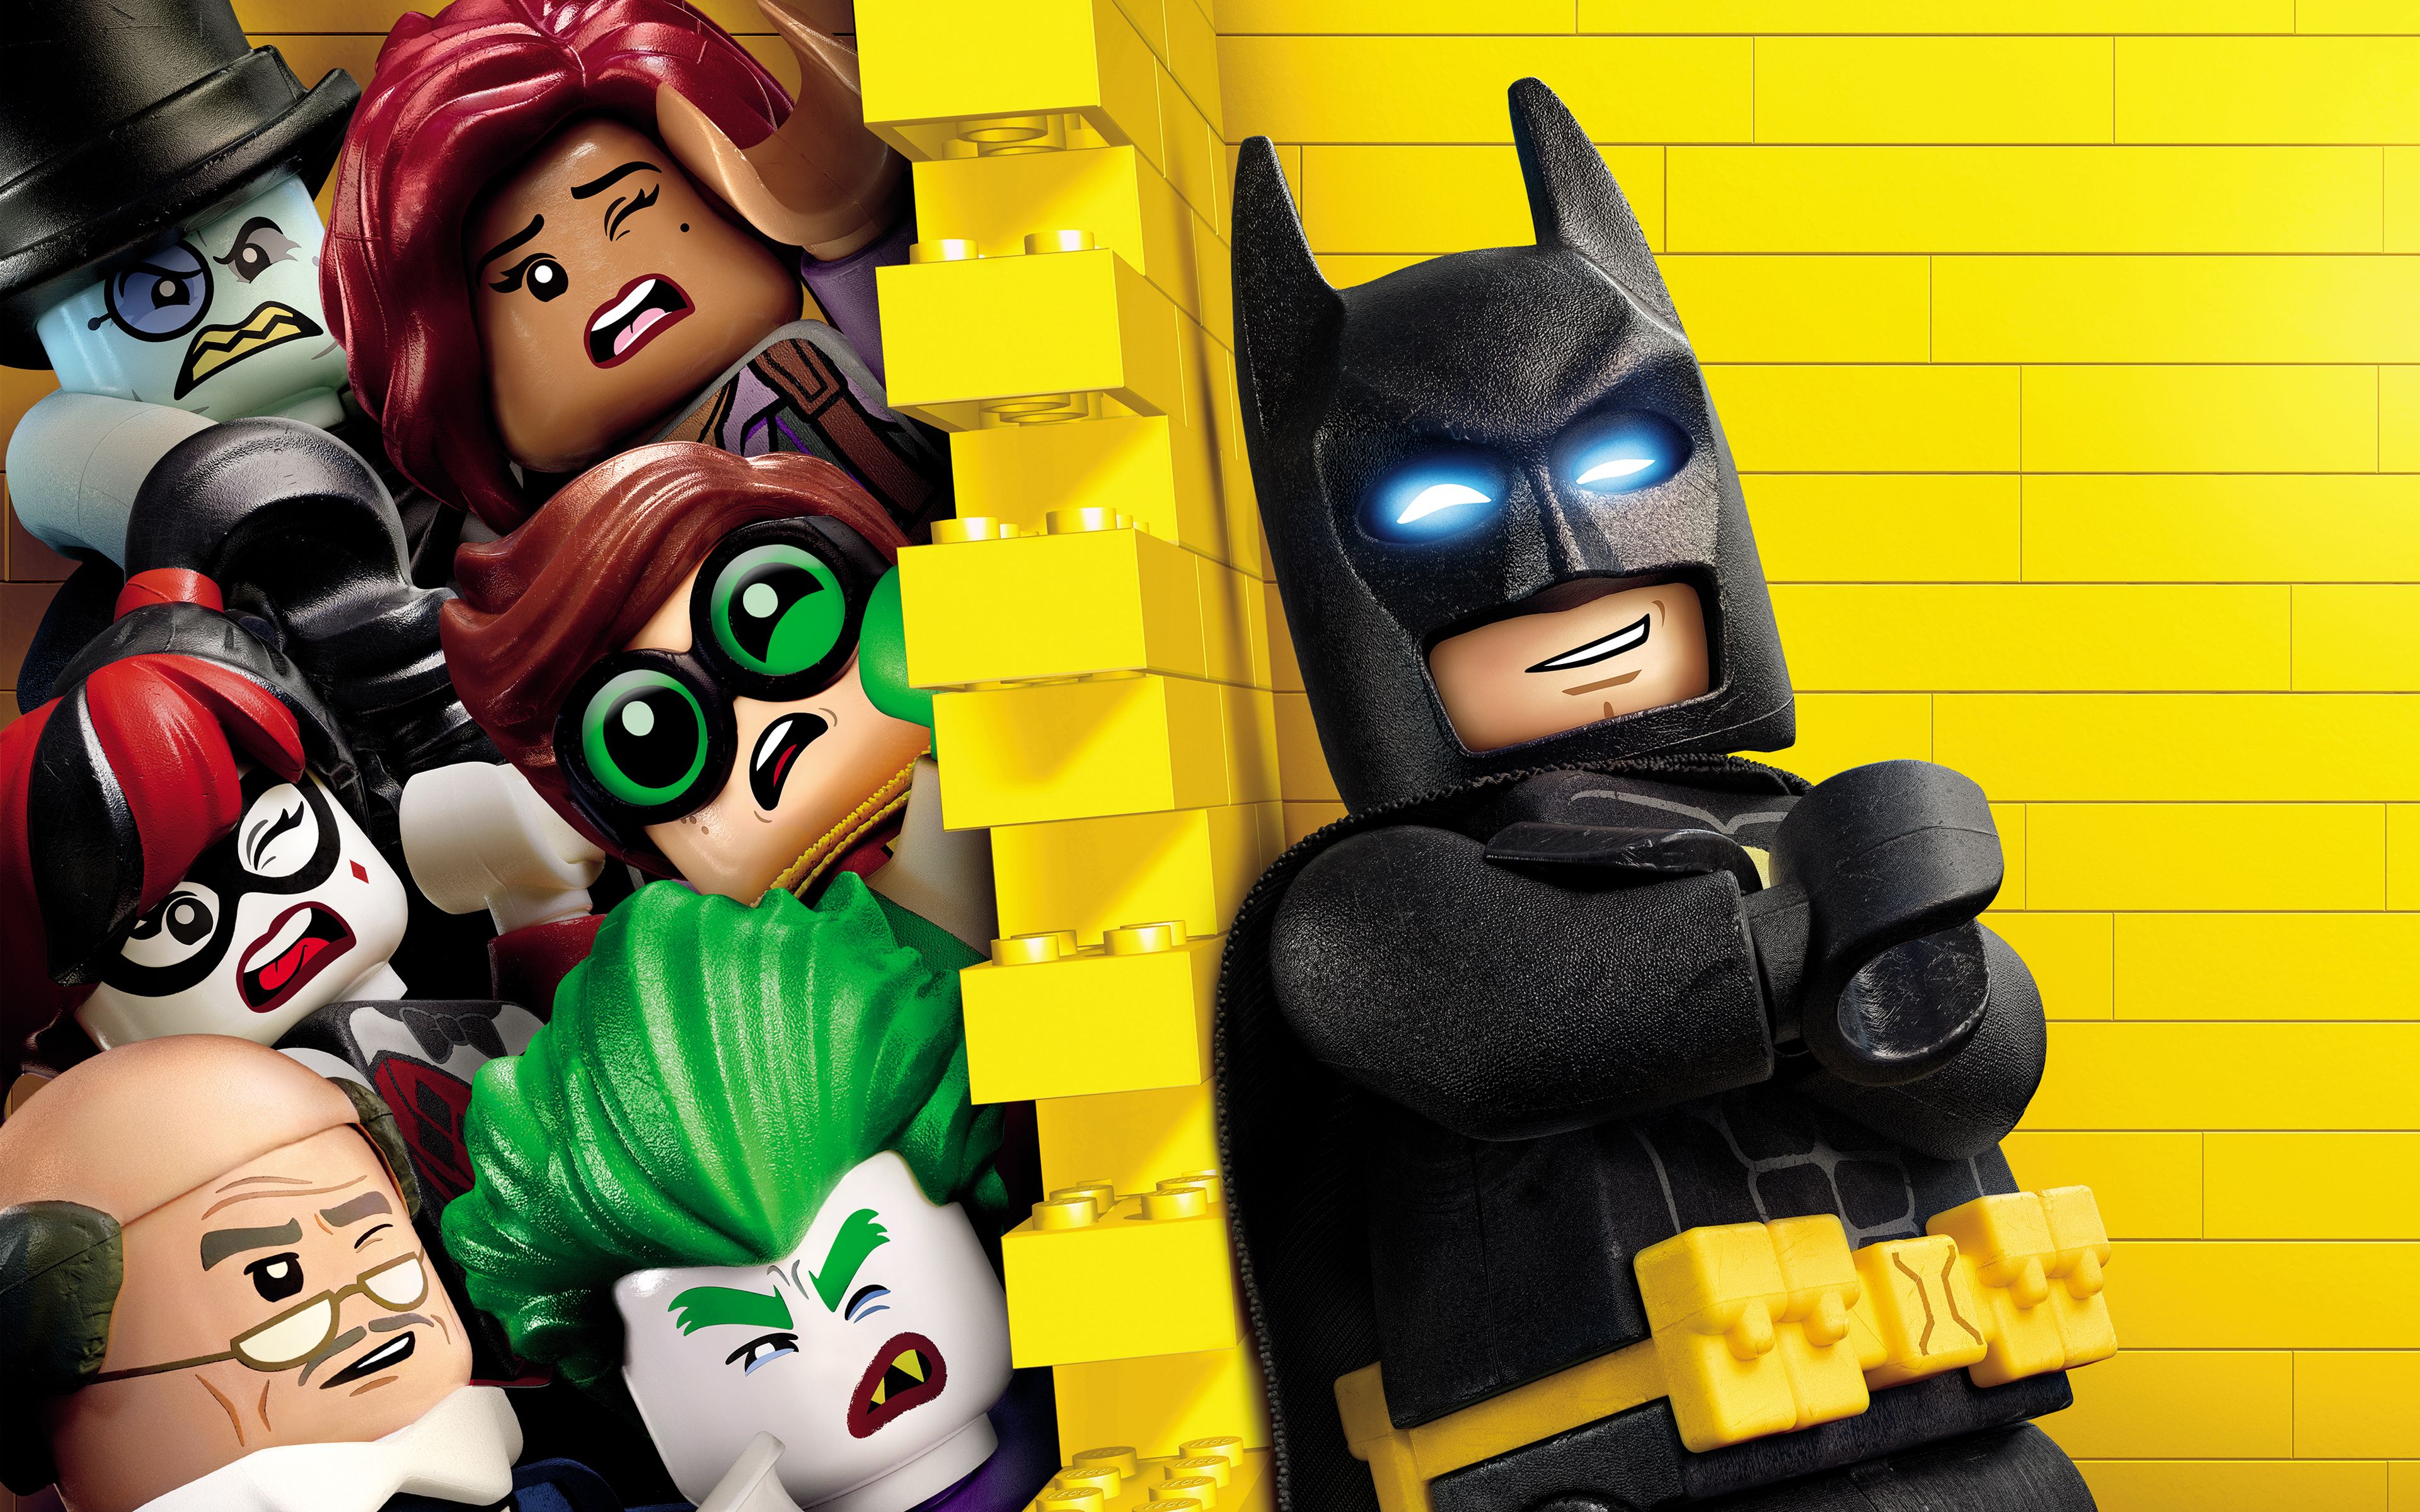 The Lego Batman Movie Wallpapers and Backgrounds Image.